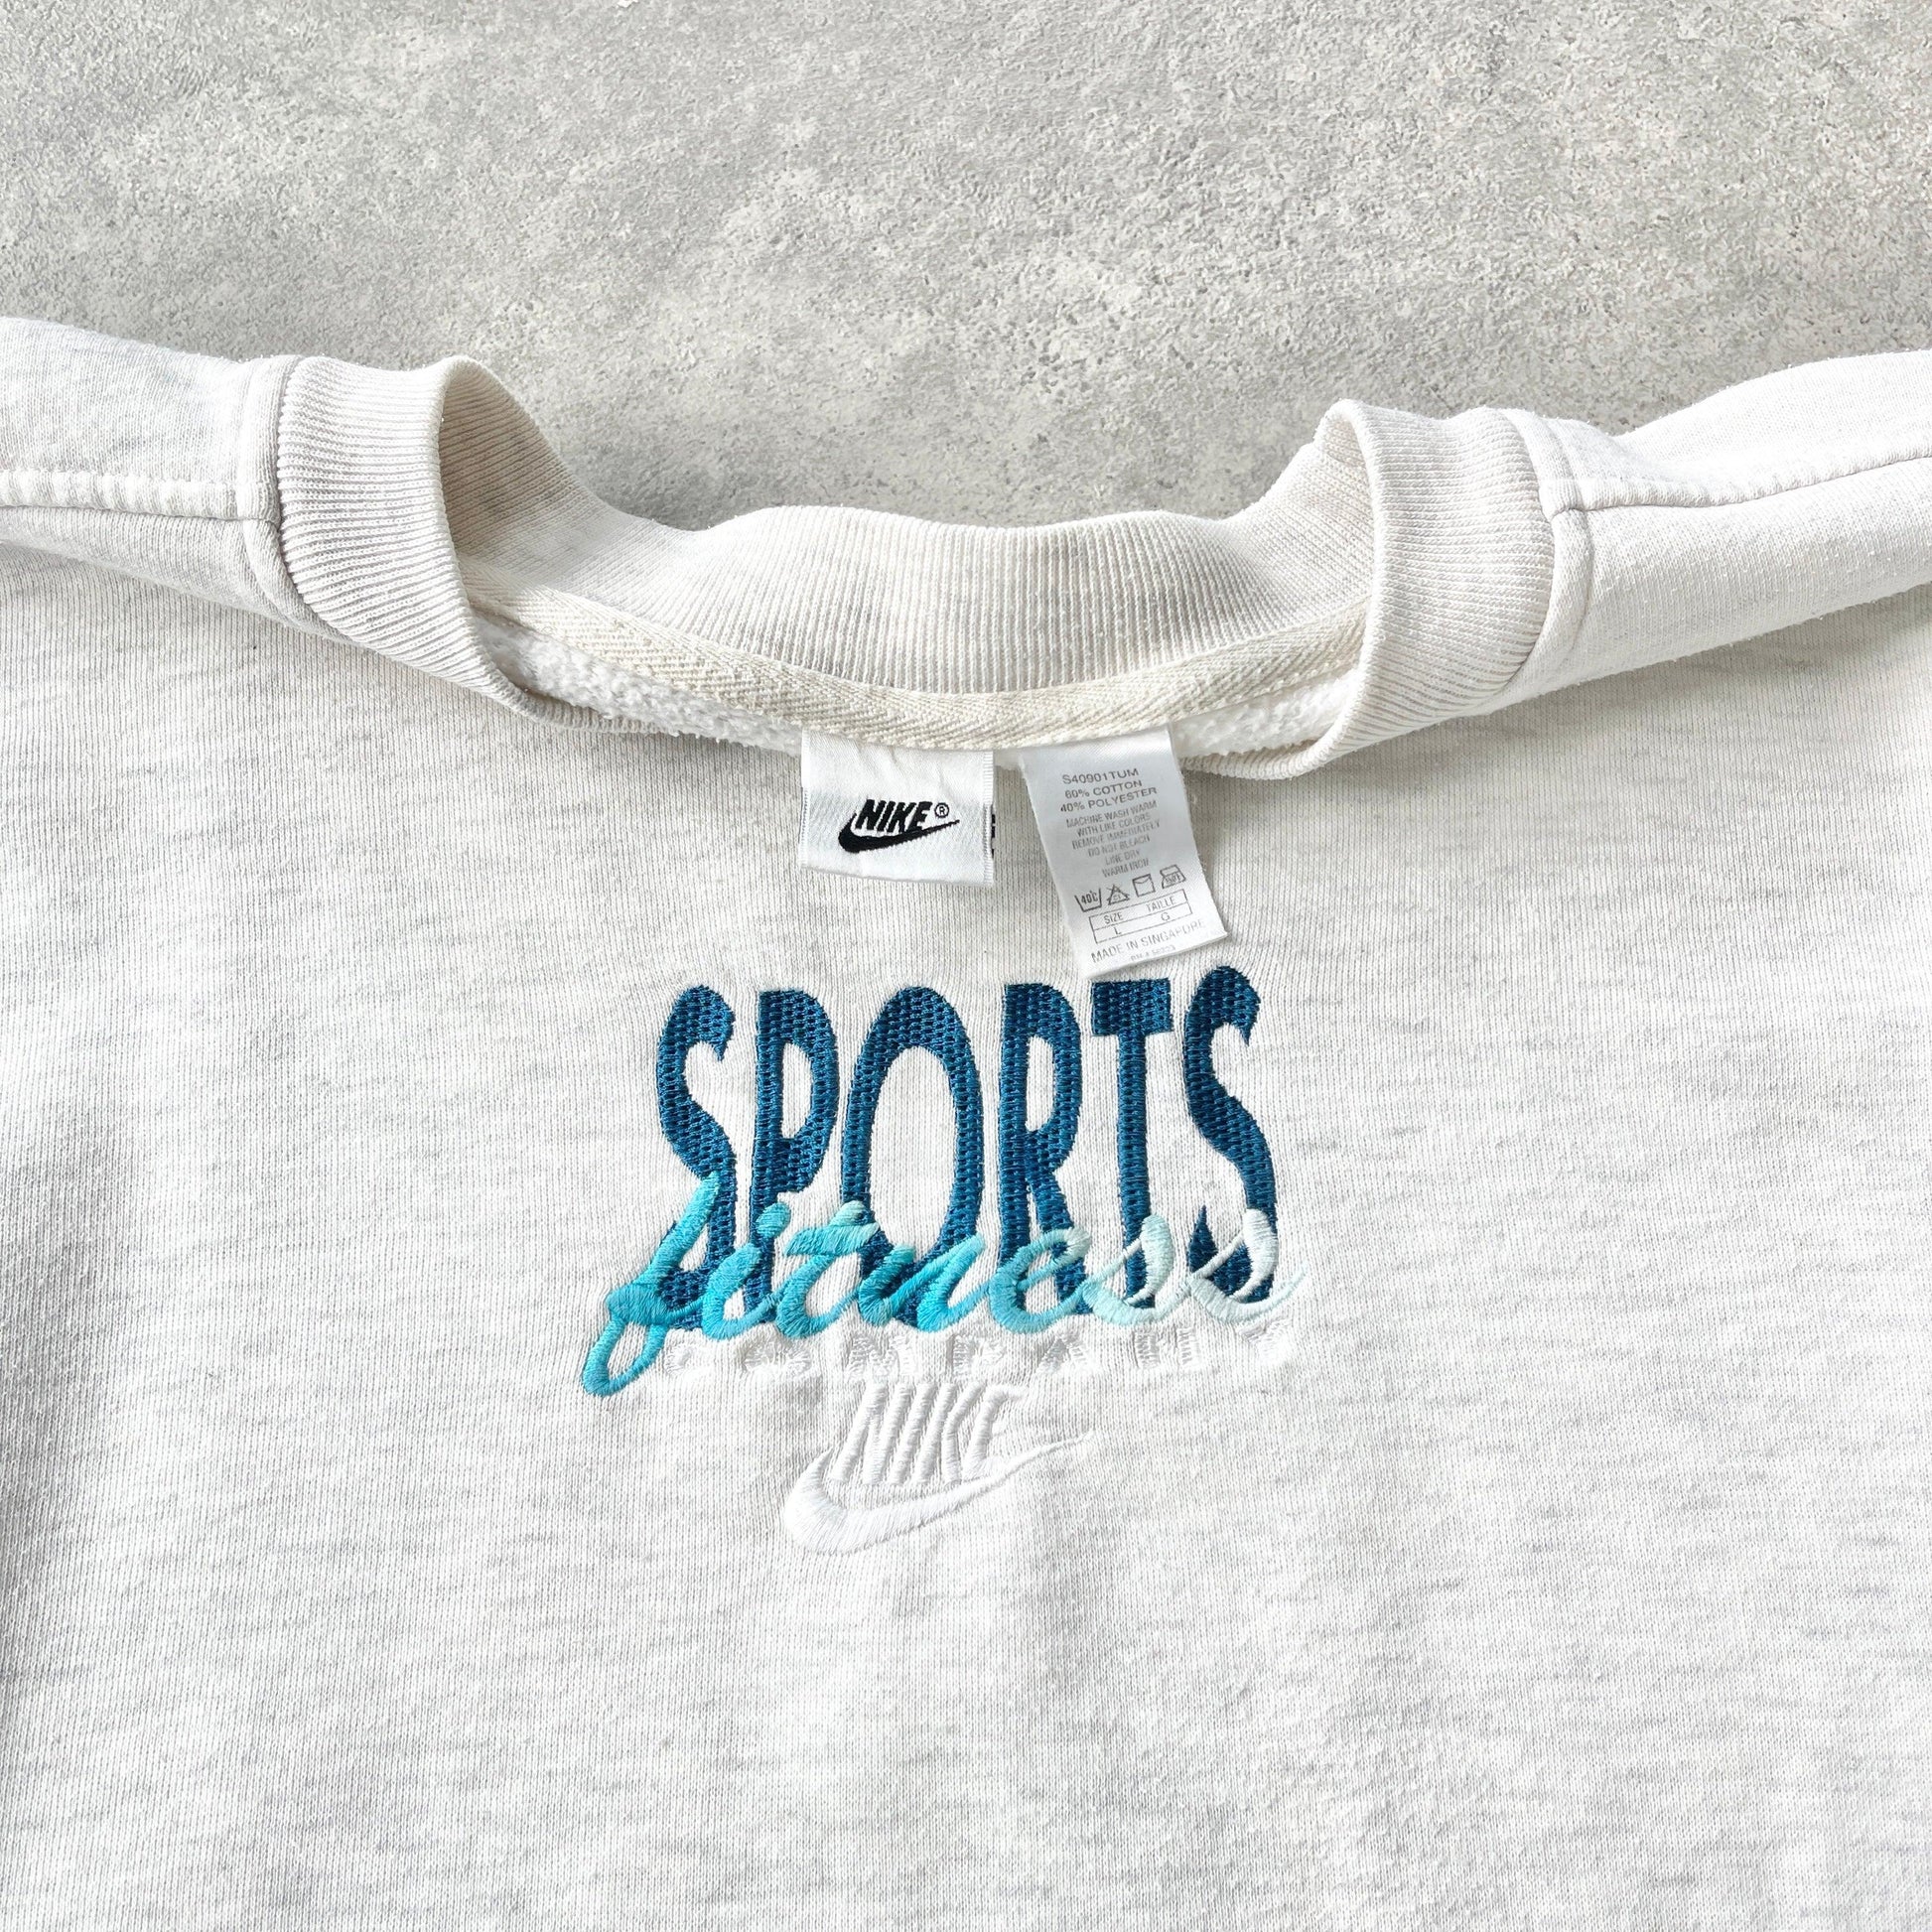 Nike RARE 1990s ‘sports fitness’ heavyweight embroidered sweatshirt (L) - Known Source